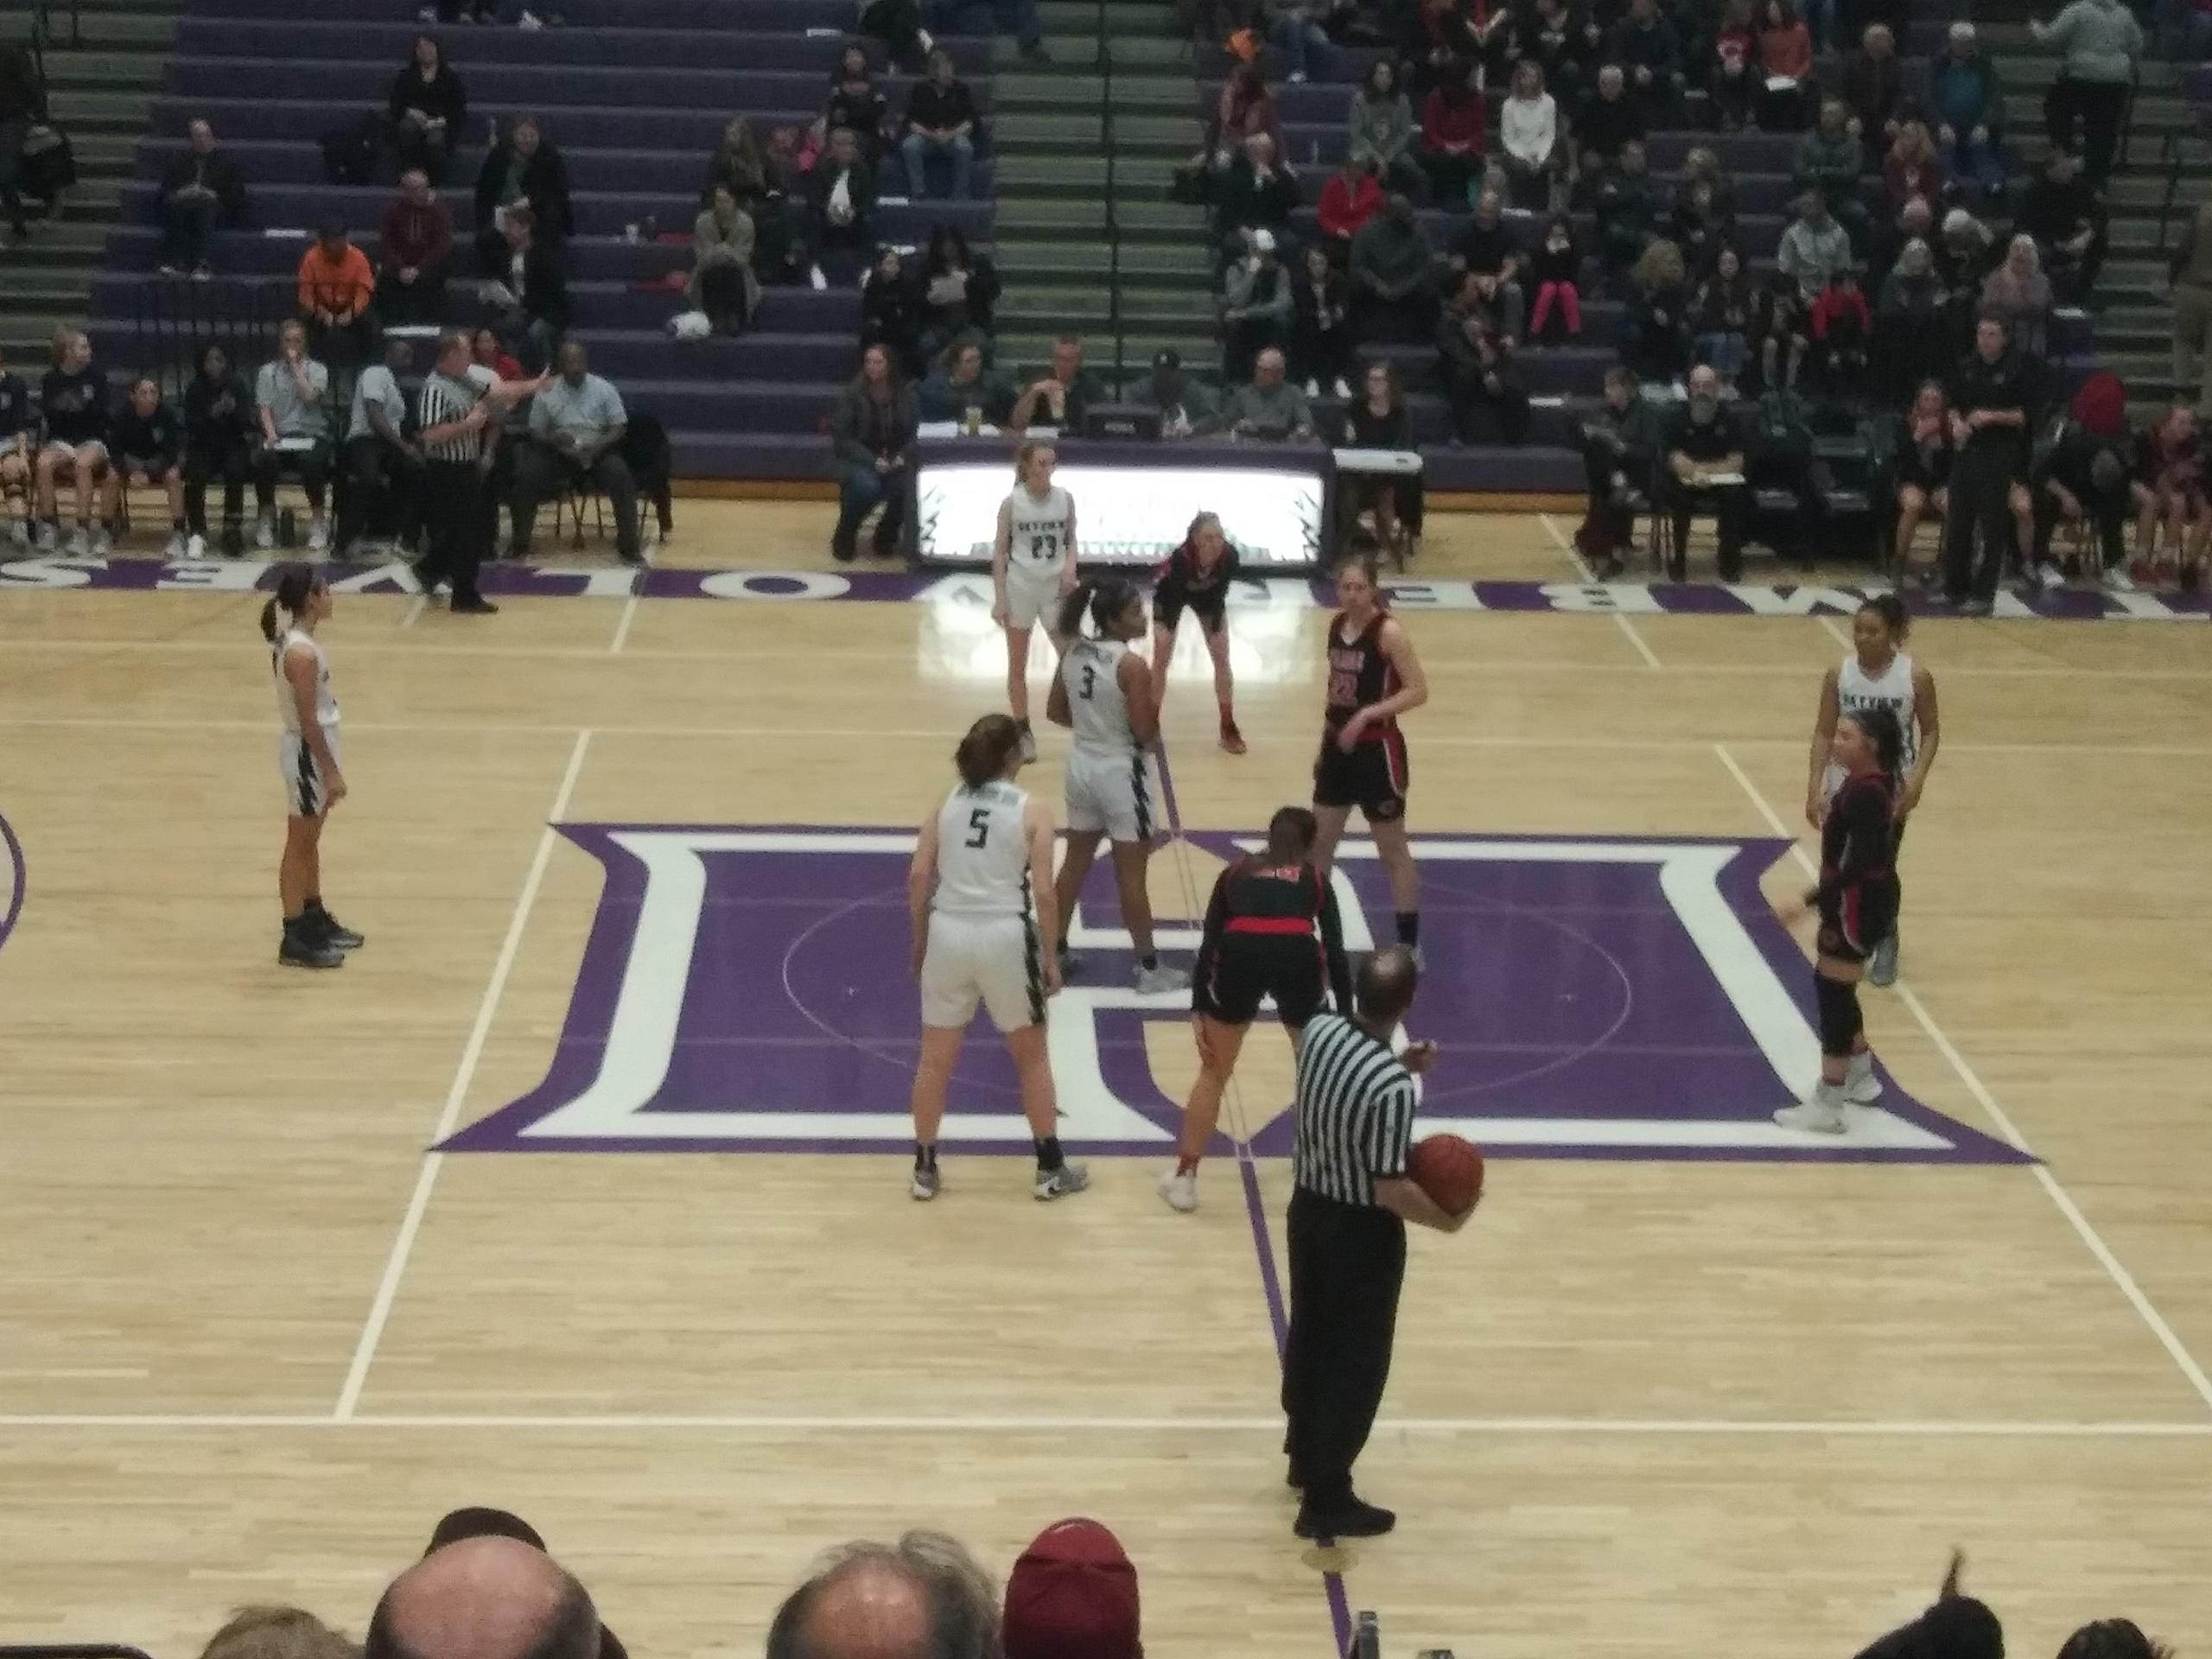 The Camas and Skyview girls basketball team get ready to tip-off at their 4A bi-district playoff game.